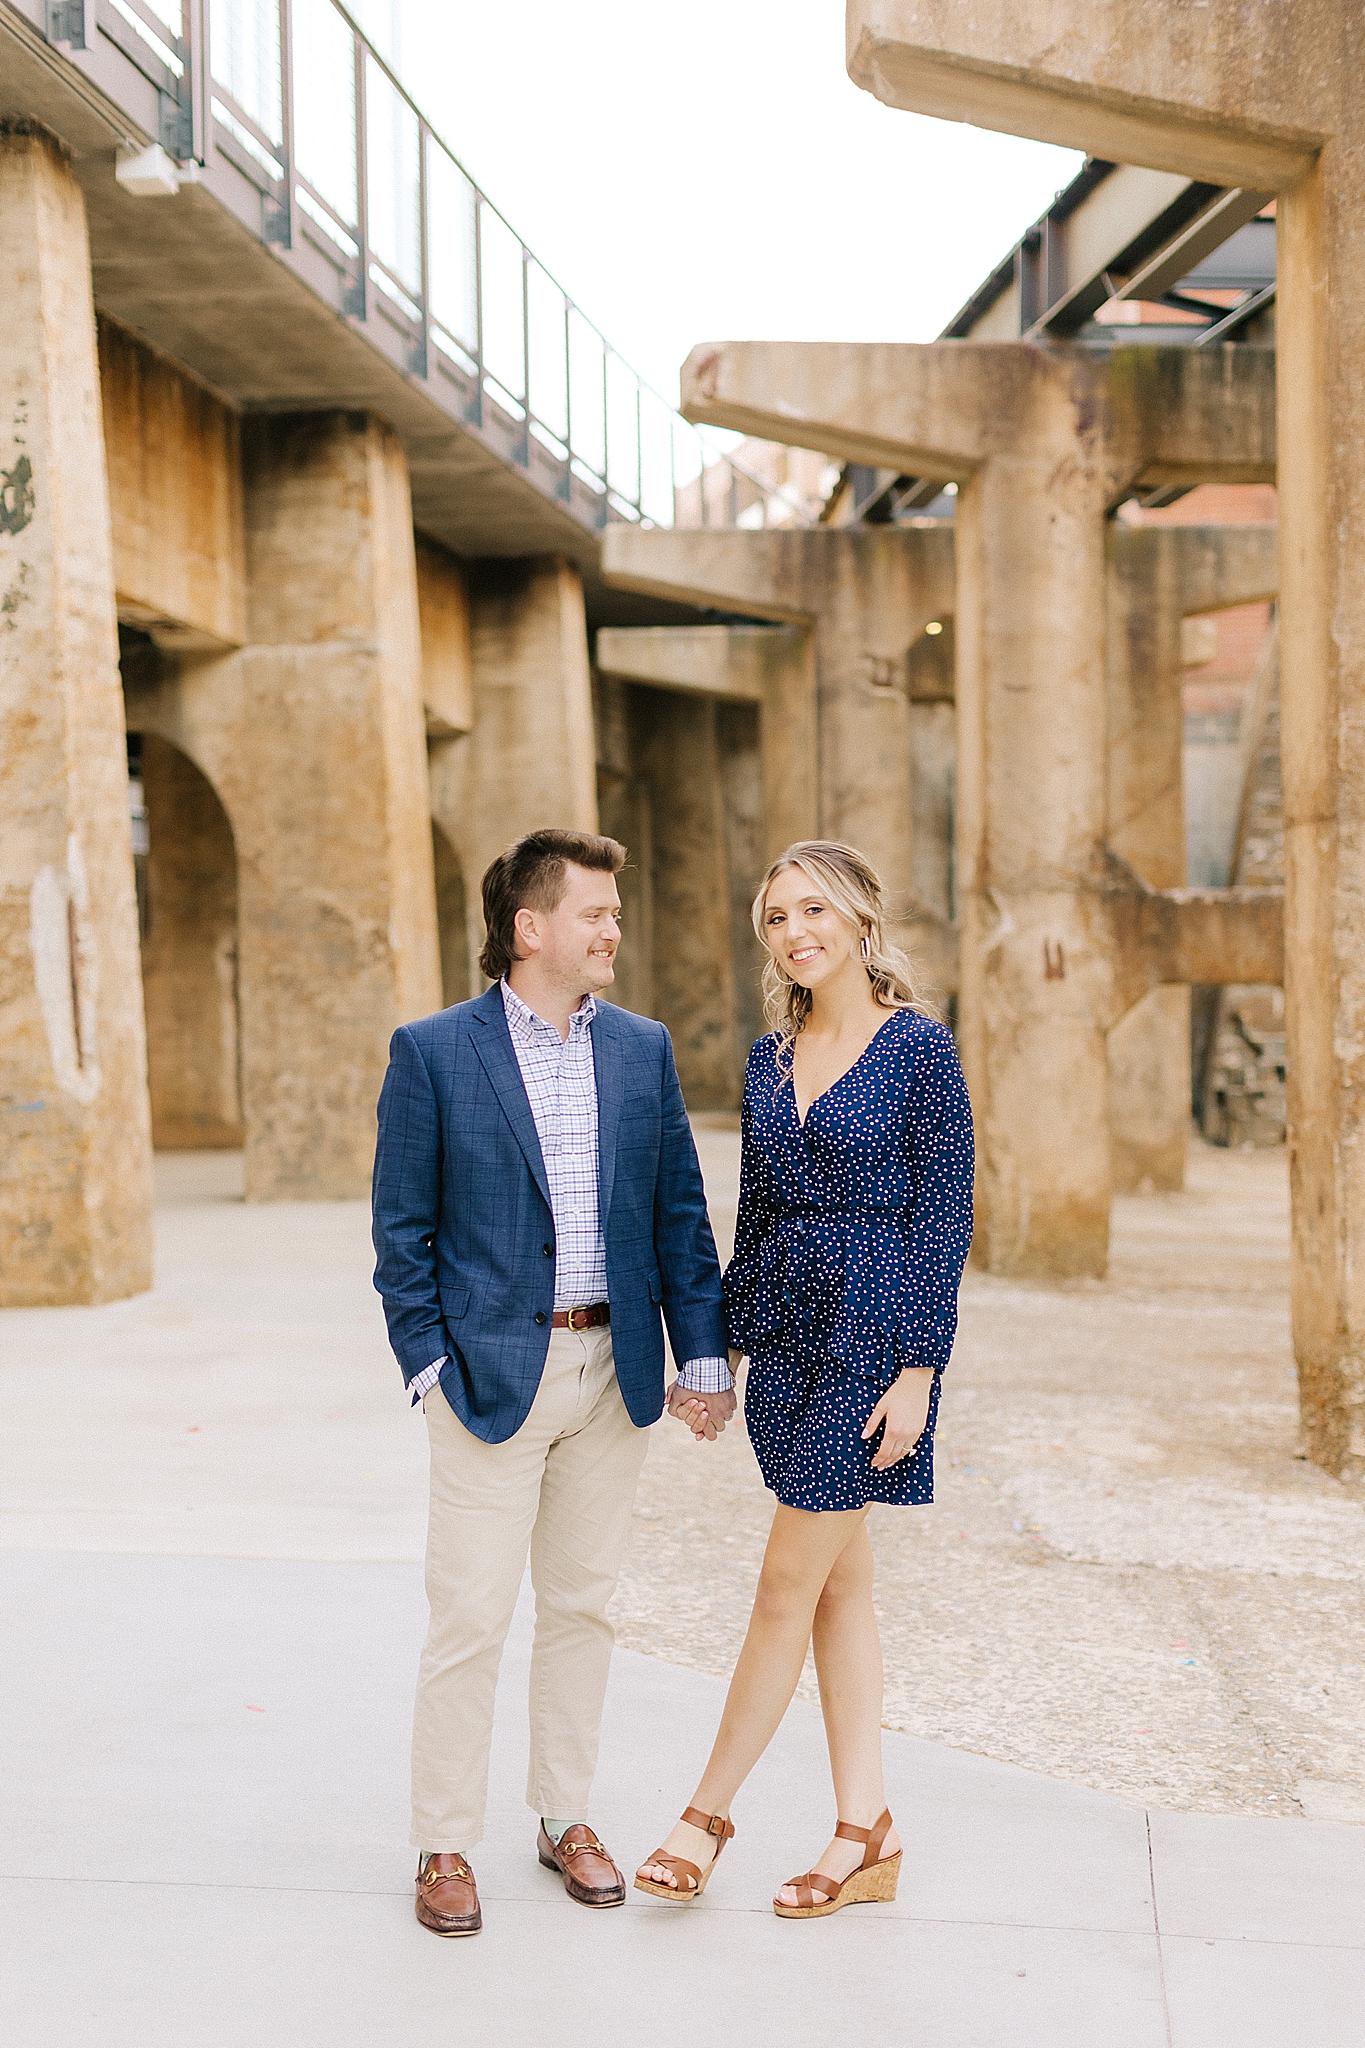 Downtown Winston Salem engagement photos with couple in navy blue